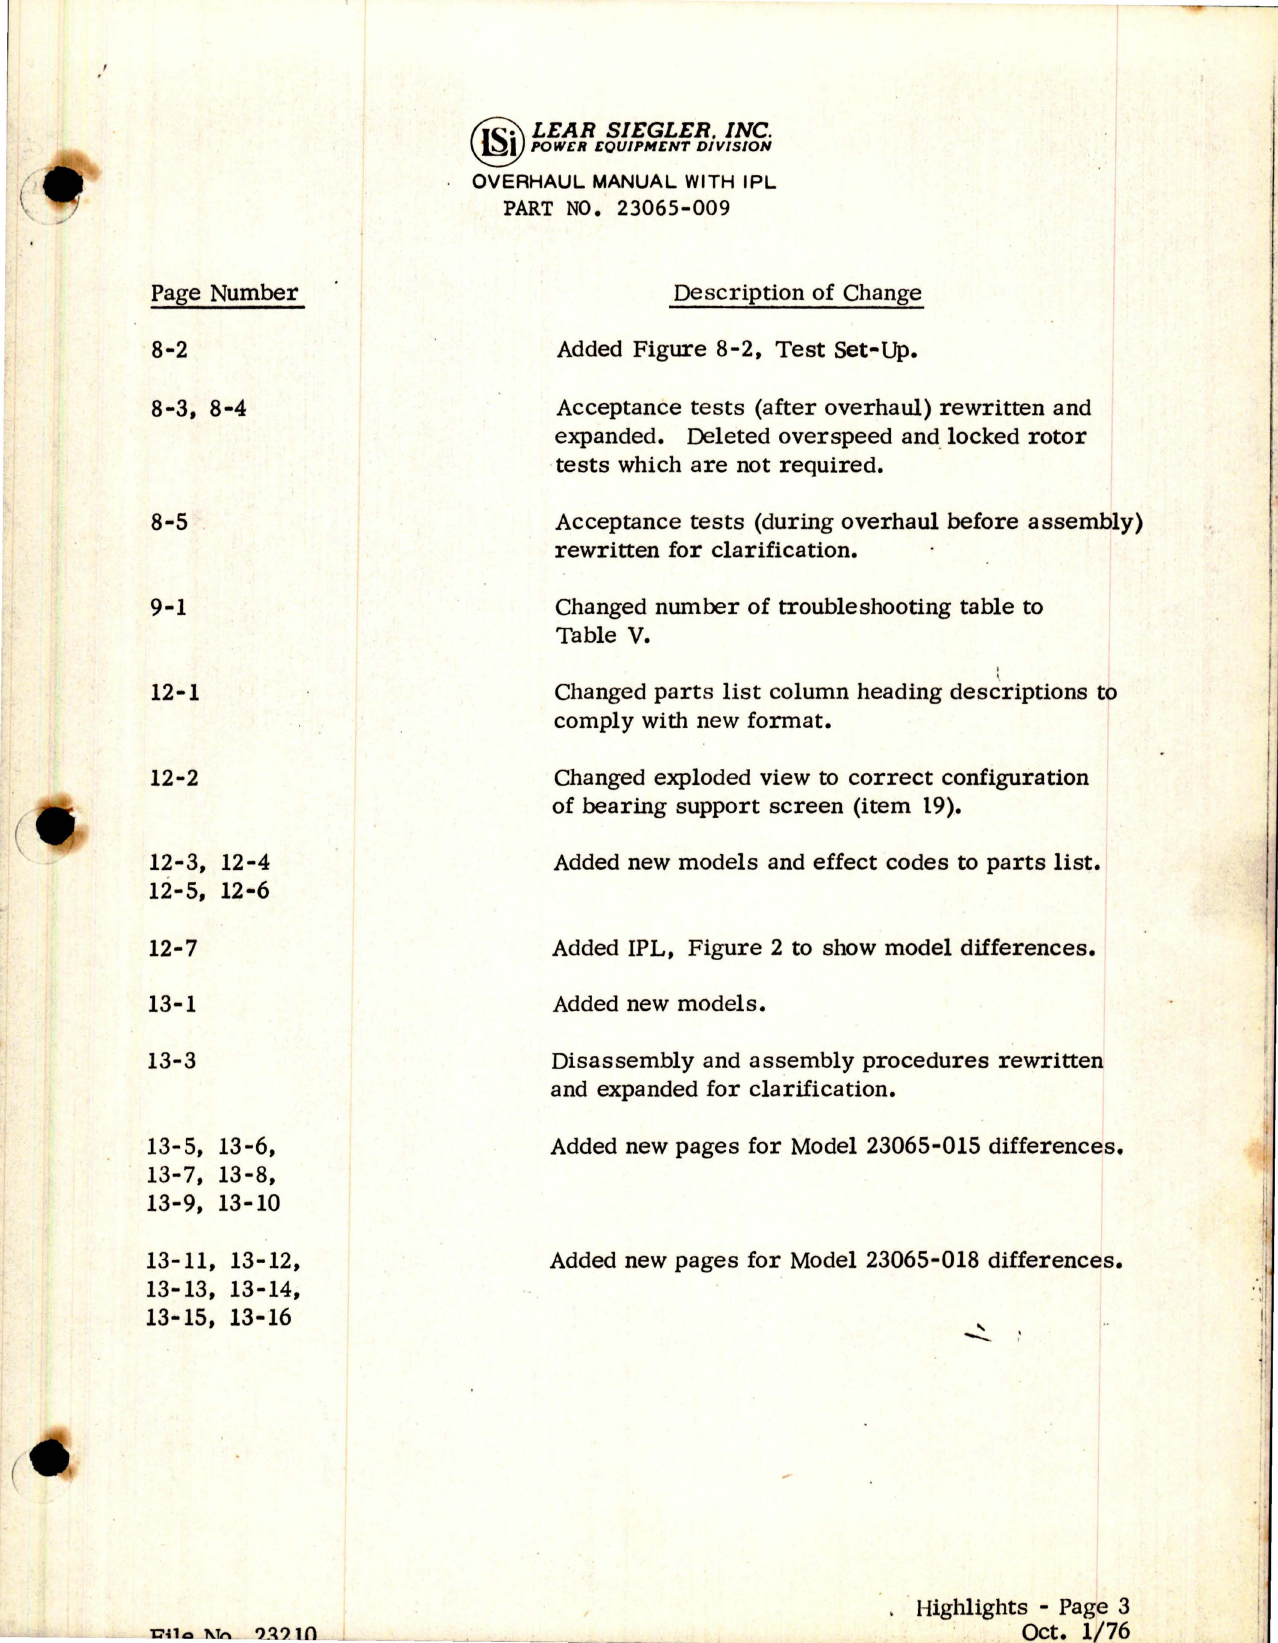 Sample page 5 from AirCorps Library document: Overhaul Manual with Illustrated Parts List for Starter Generator - Revision 2 